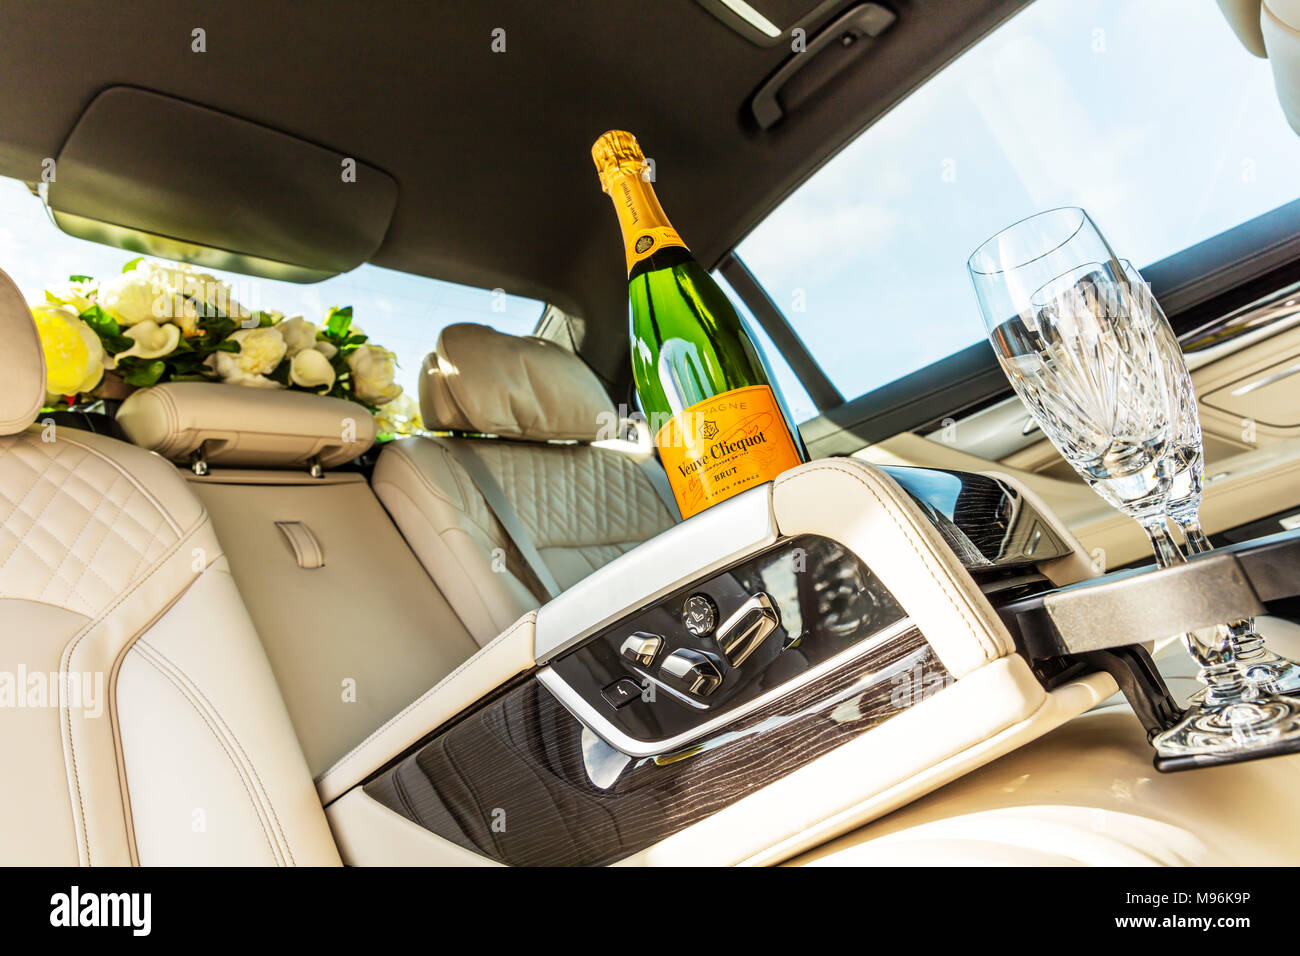 Champagner, Veuve Clicquot Champagner, Flasche Veuve Clicquot Champagner, Champagner Flasche im Auto, Veuve Clicquot, Champagner, Champagner Gläser Stockfoto